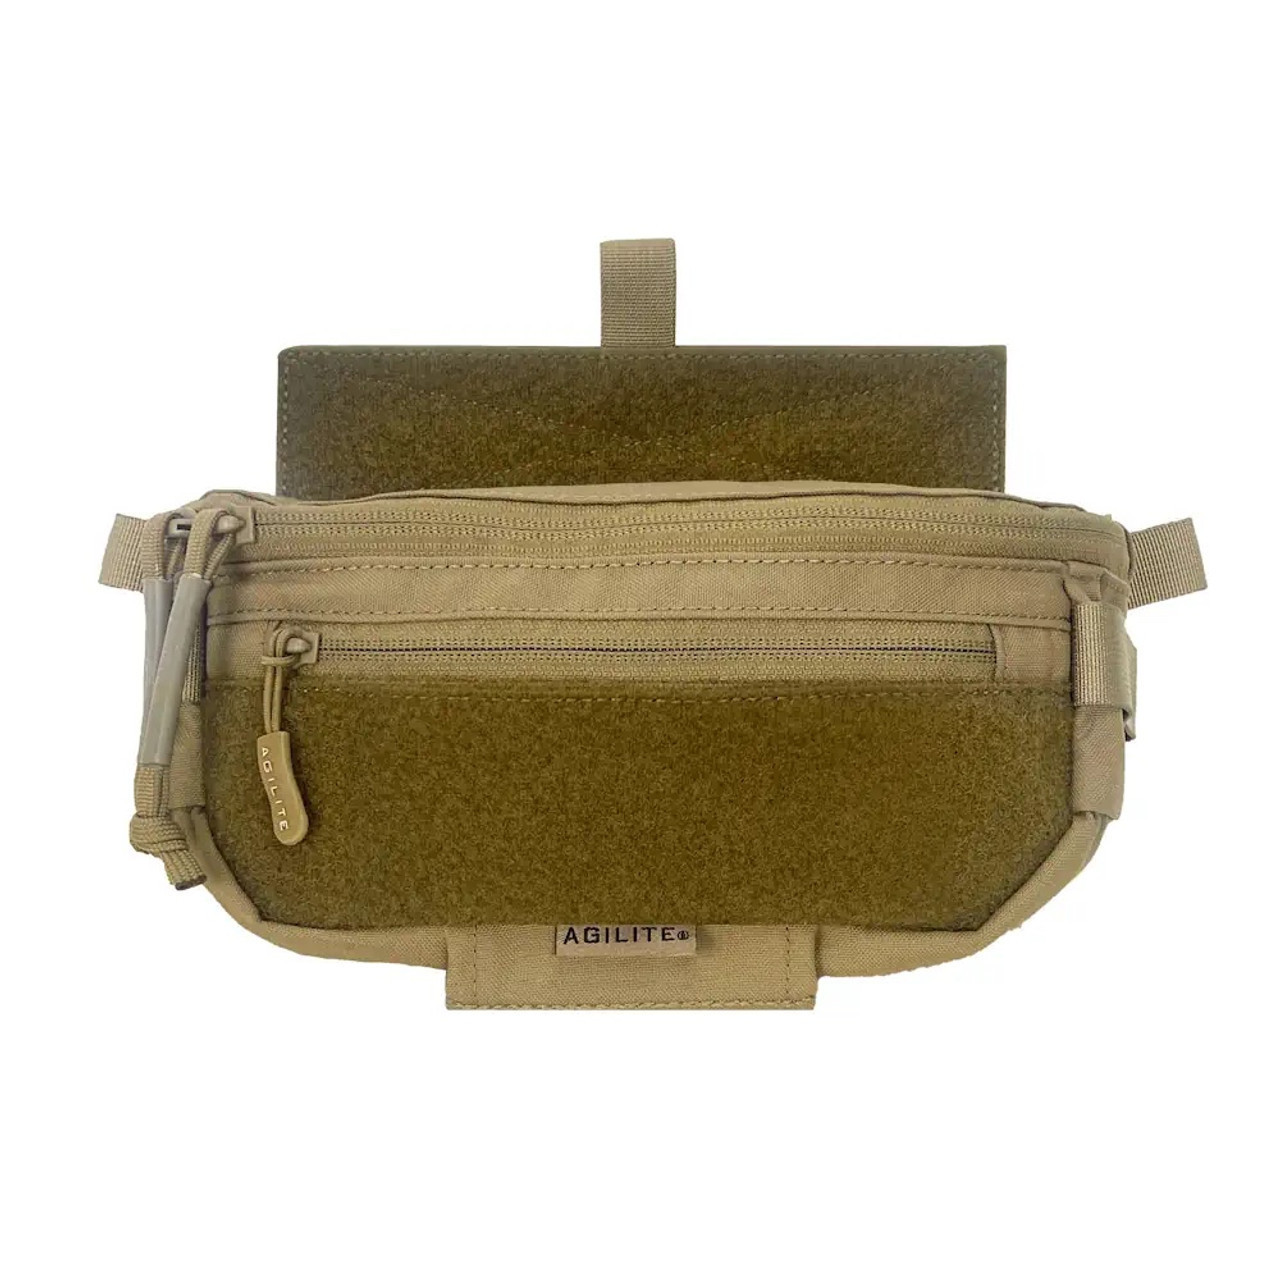 Hanger Pouch Six Pack by Agilite buy with delivery to the USA - BATTLE  STEEL®️